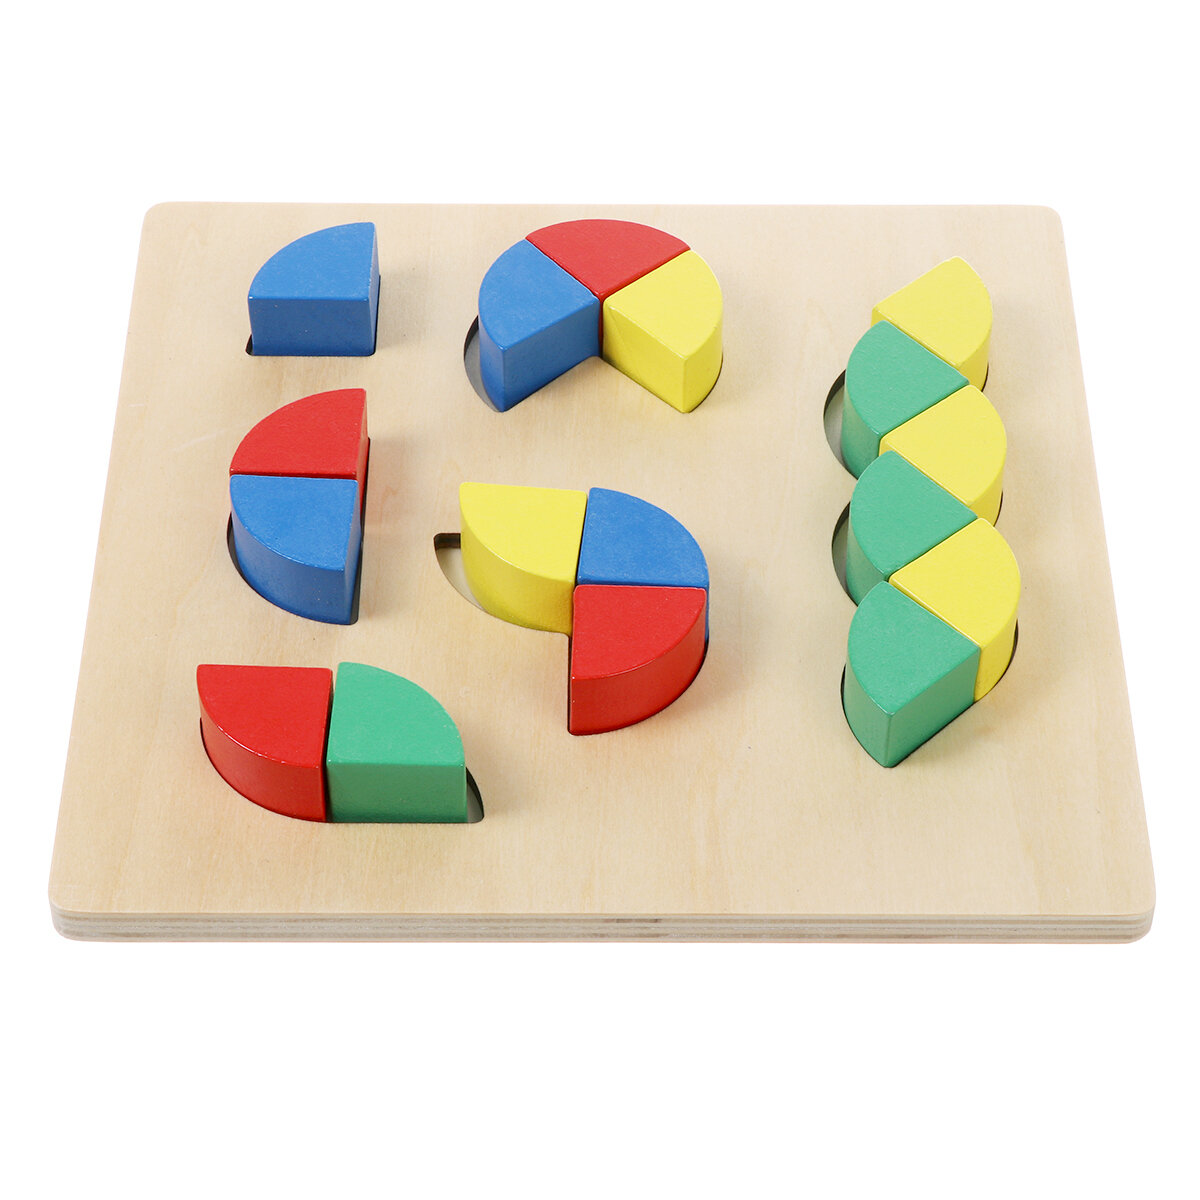 3D Wooden Geometric Blocks Geometric Shapes Puzzle Kids Brain Development Early Educational Toys for Childrens GIfts